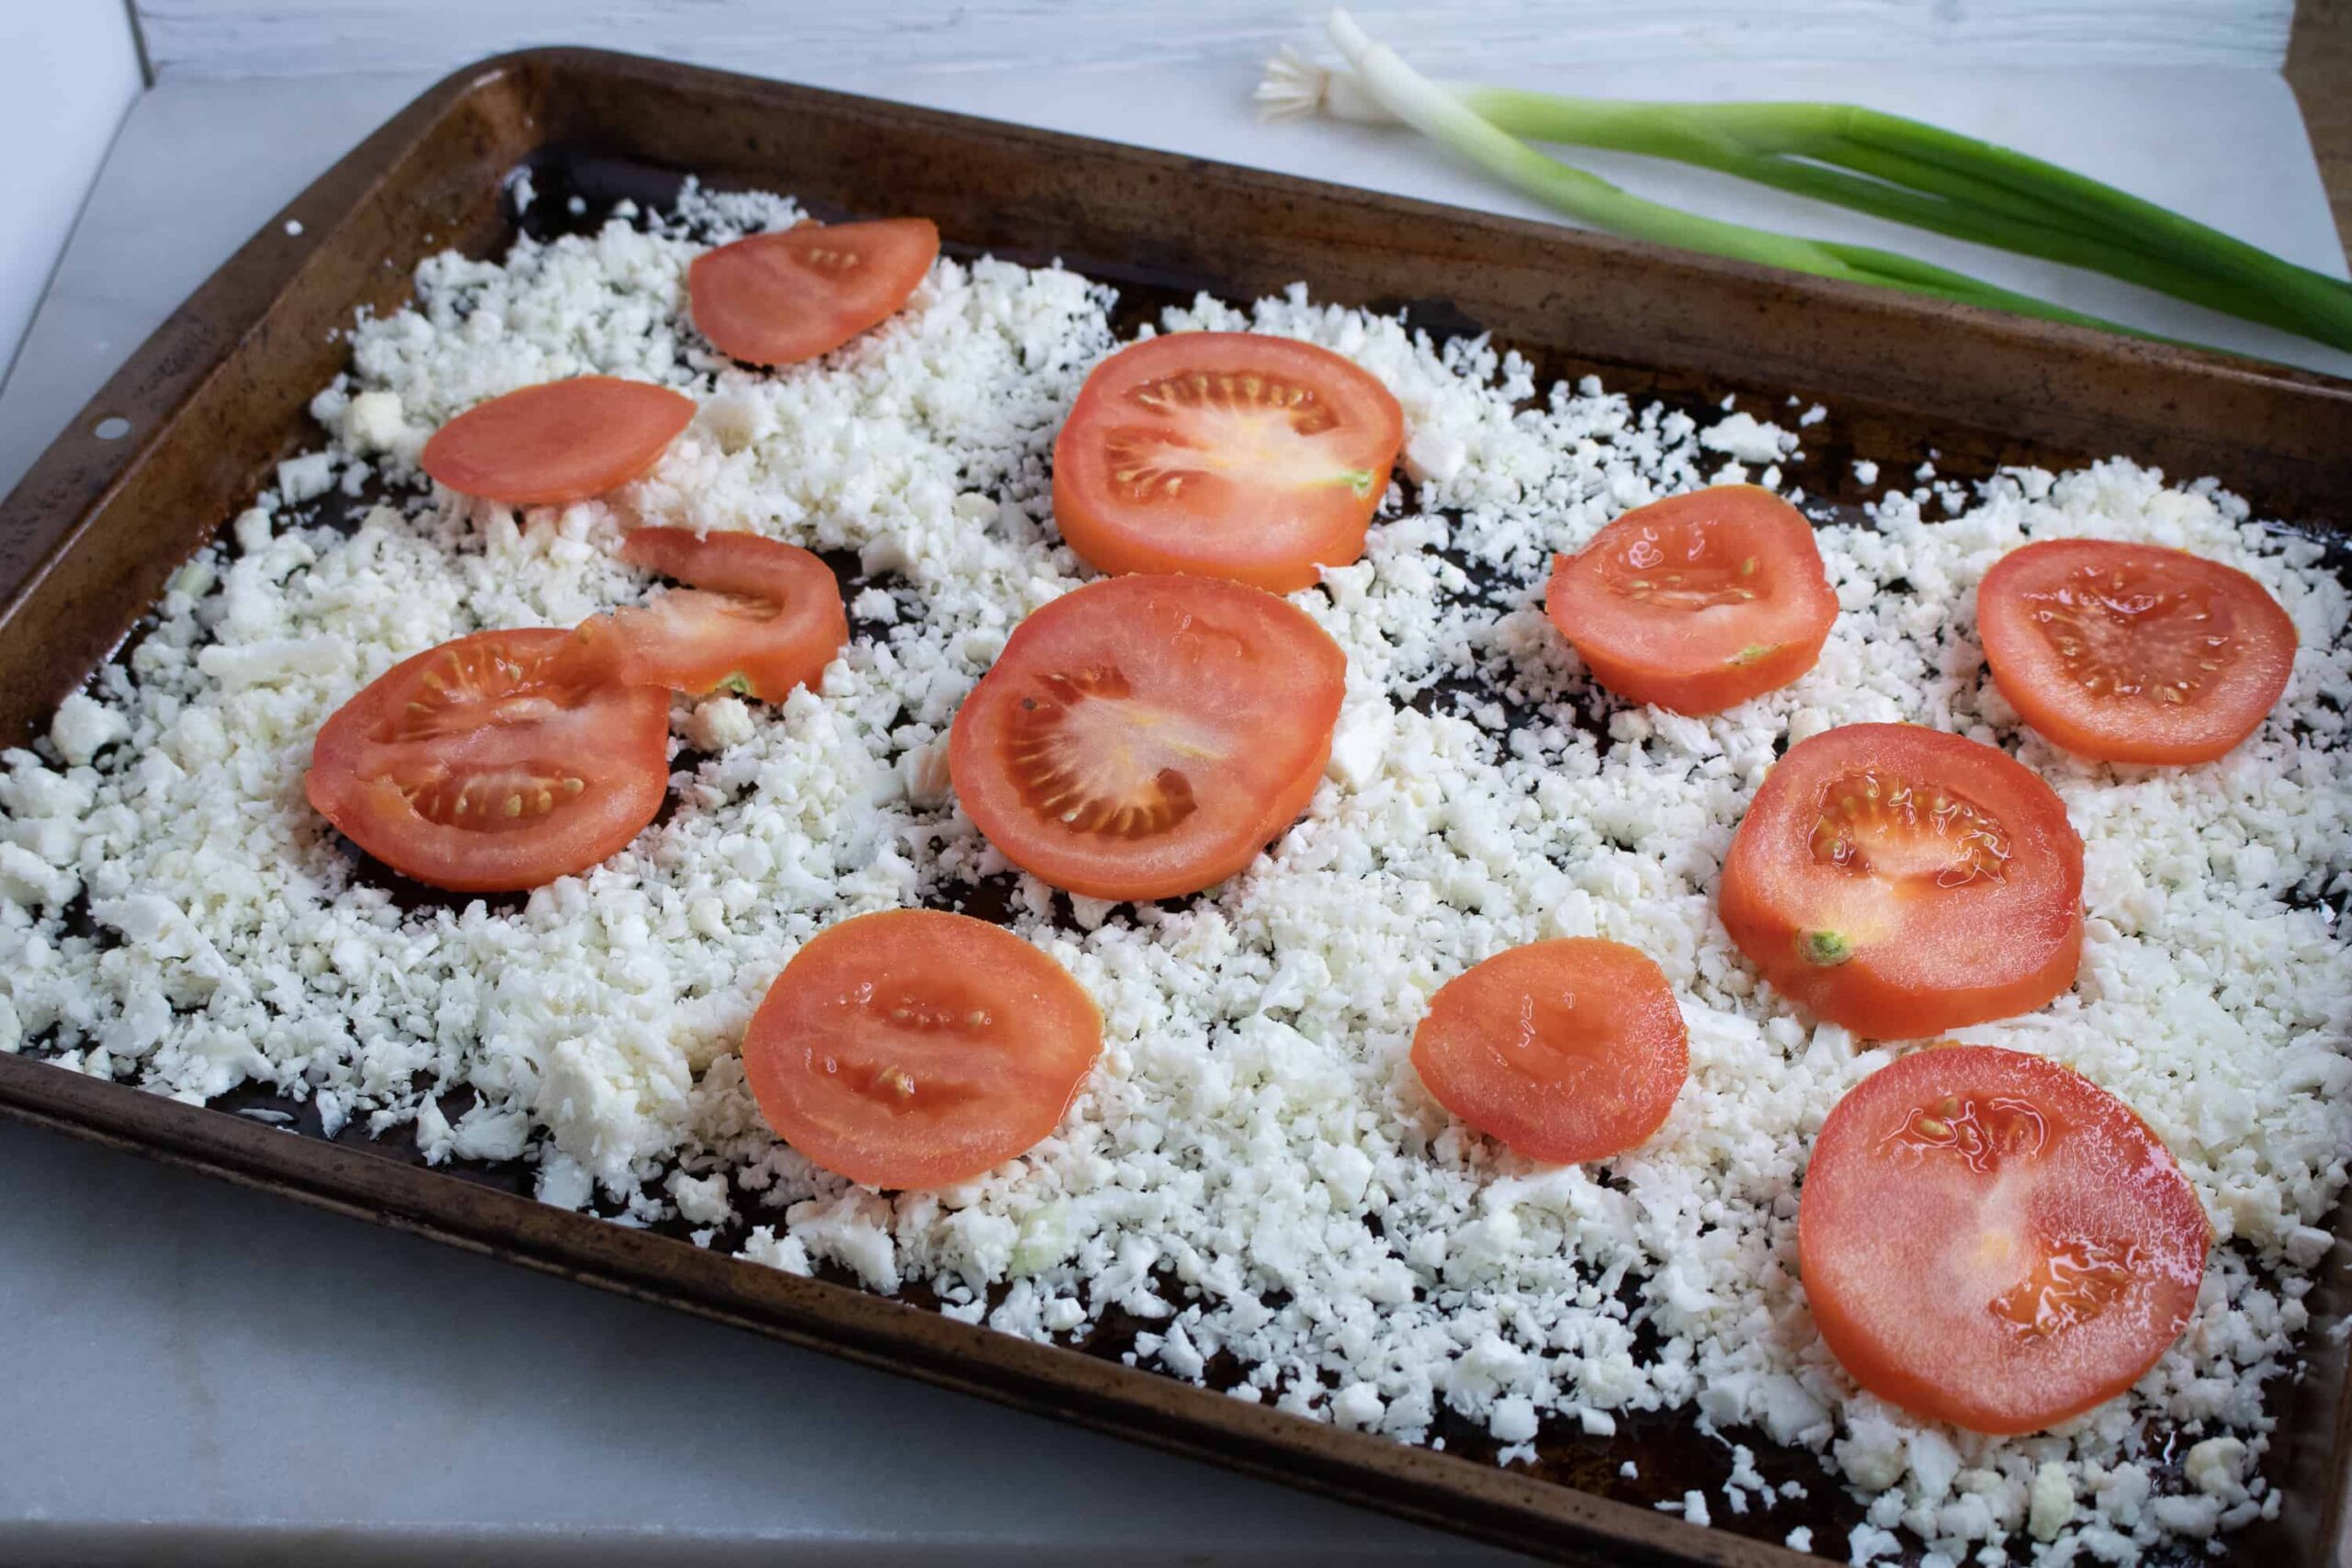 Cauliflower rice and tomato slices on a baking sheet